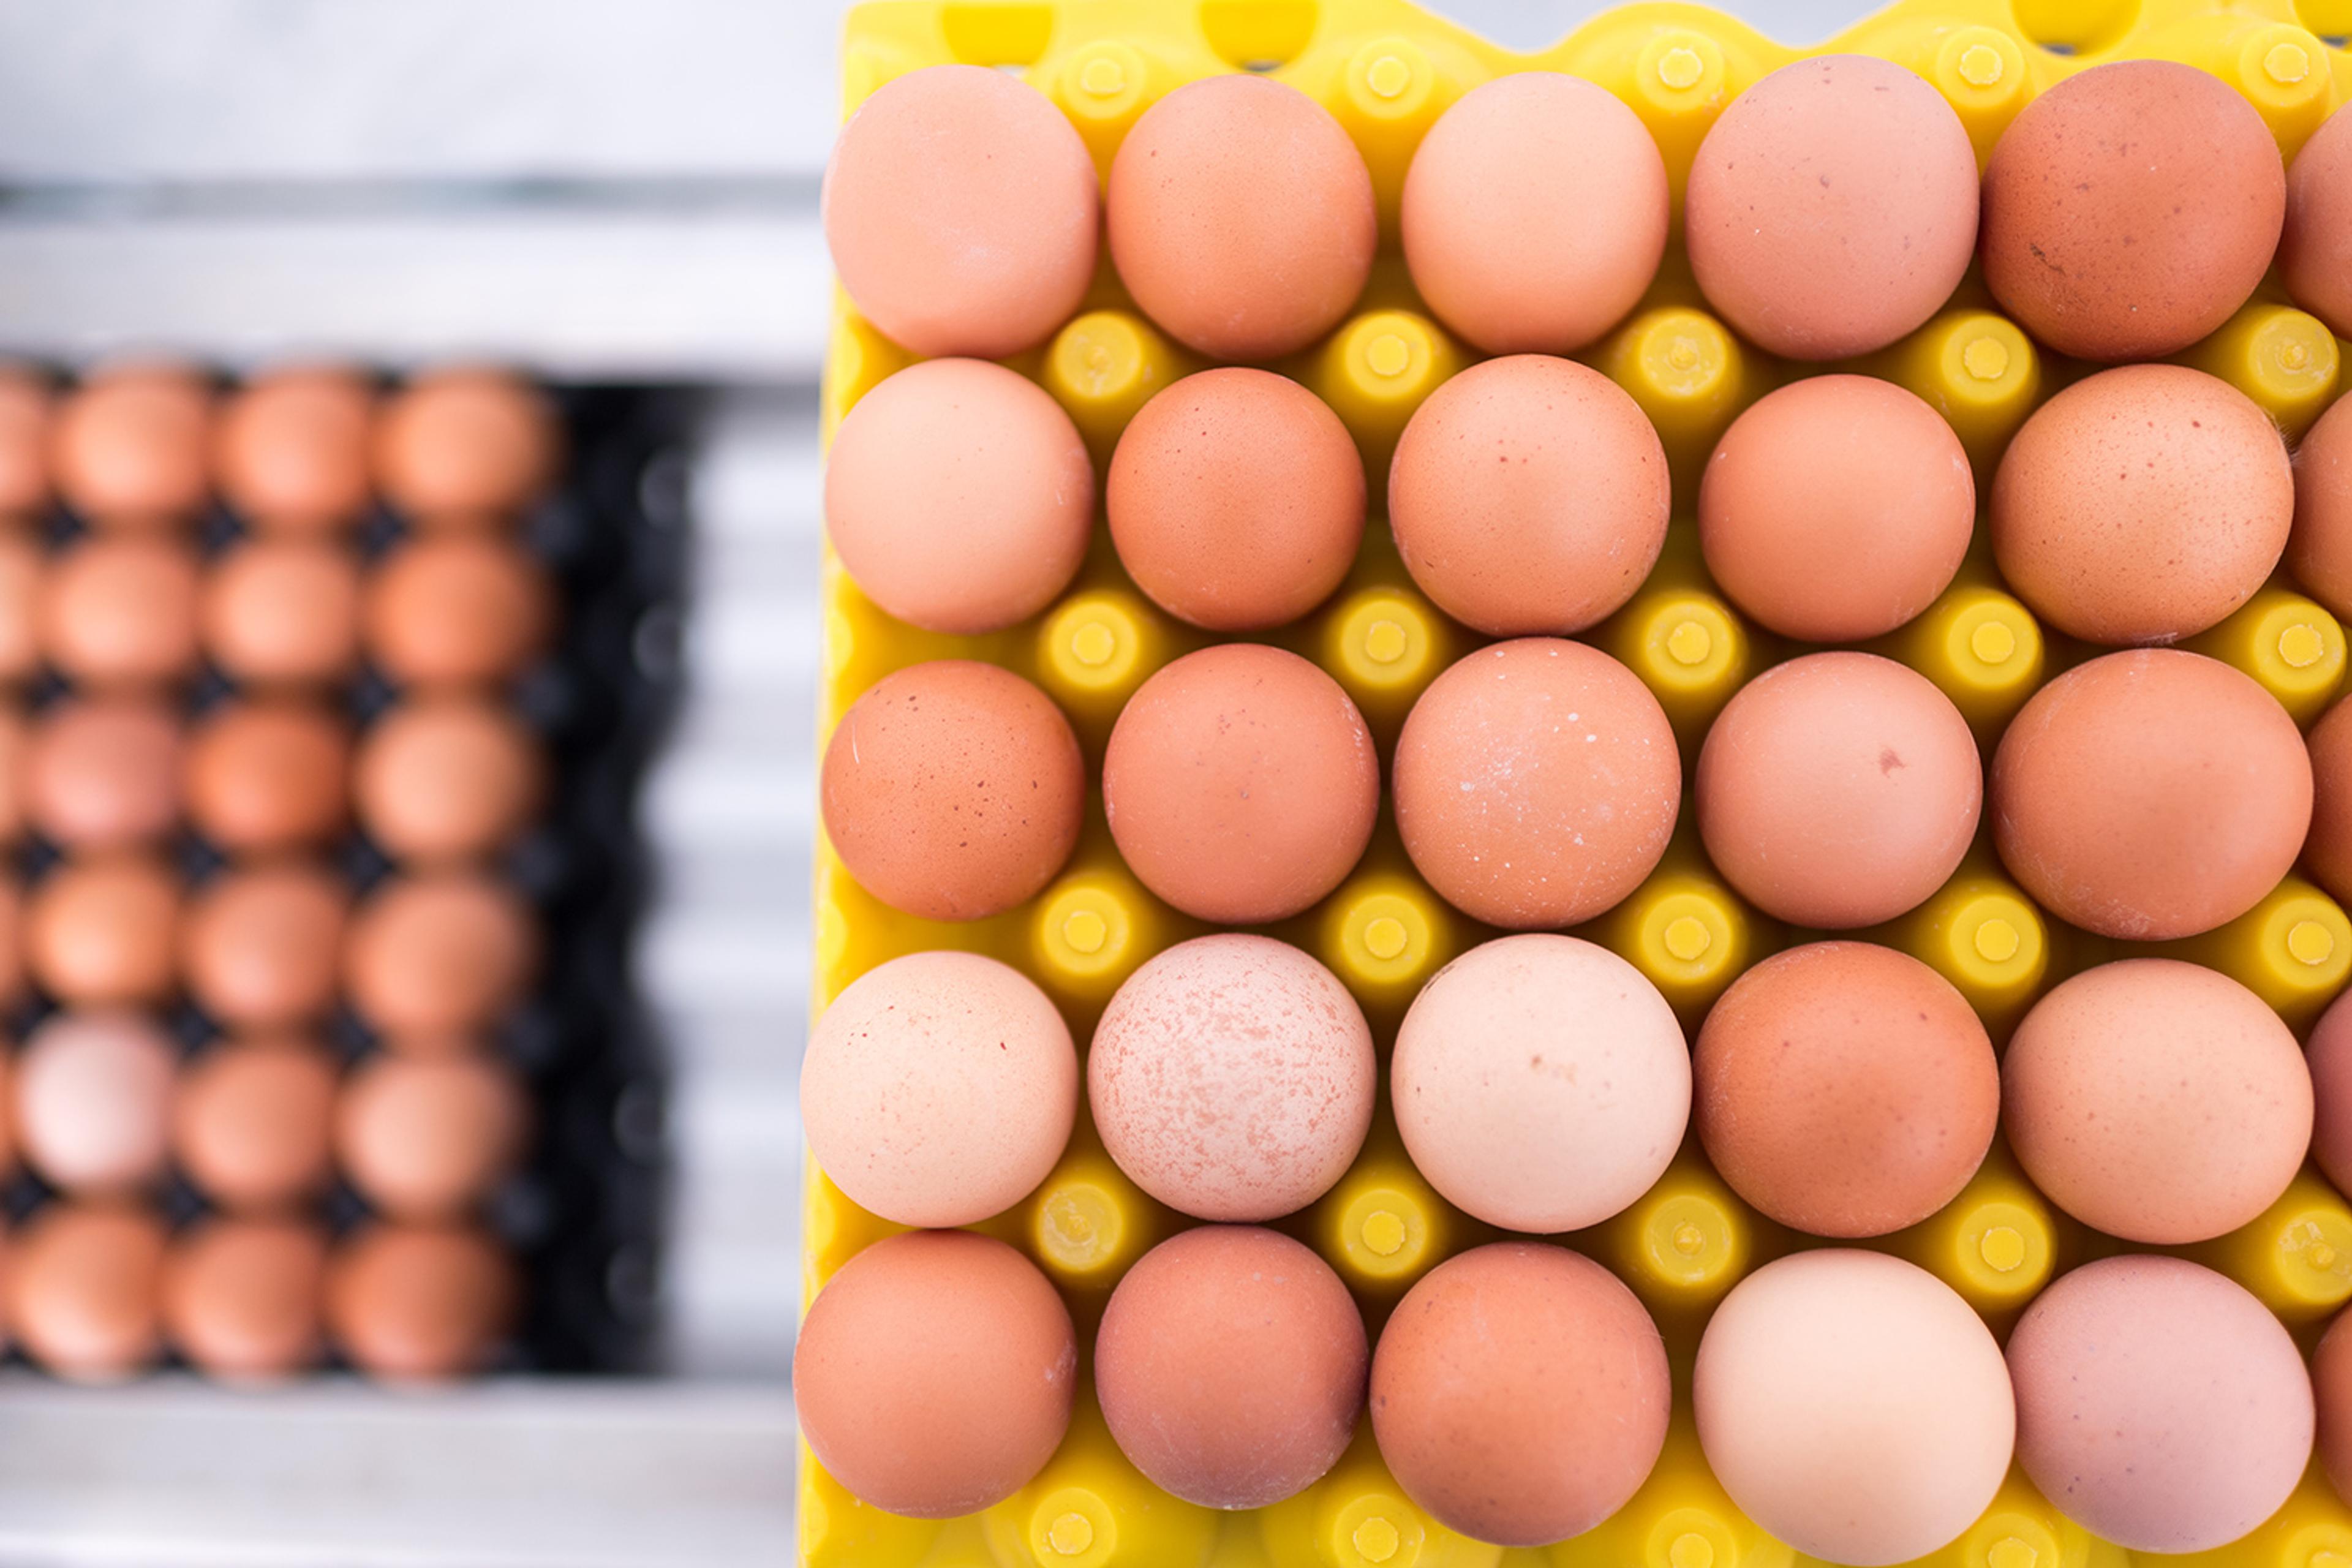 The eggs laid by the hens at the Welsh Family Farm in Iowa are shades of brown and tan, with a speckled one here and there.